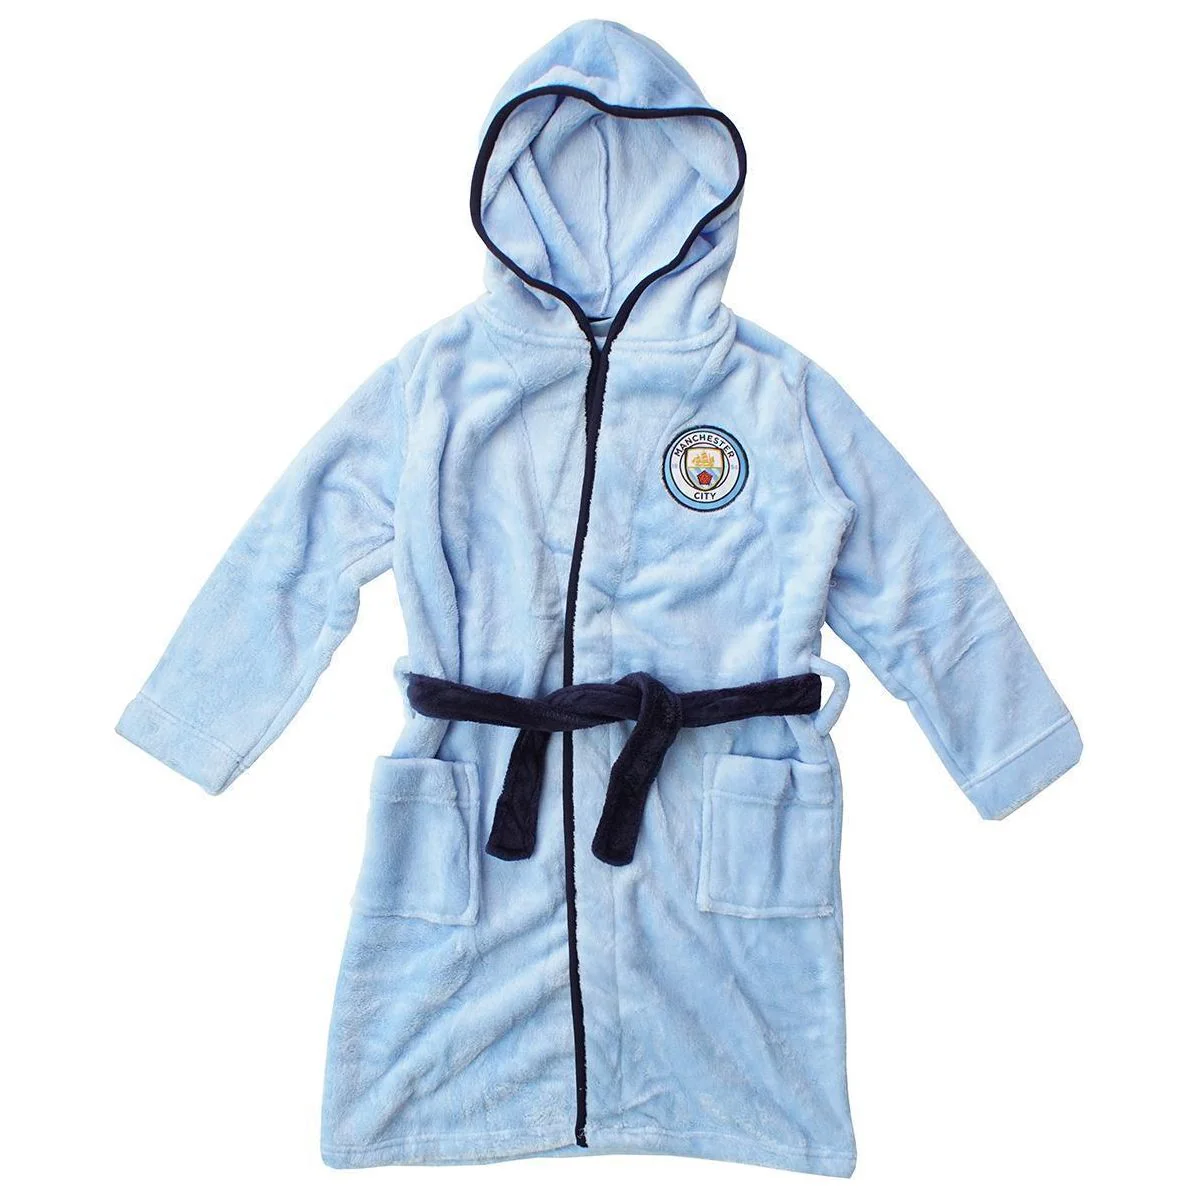 Man City kids dressing gown / Childrens Manchester City gown